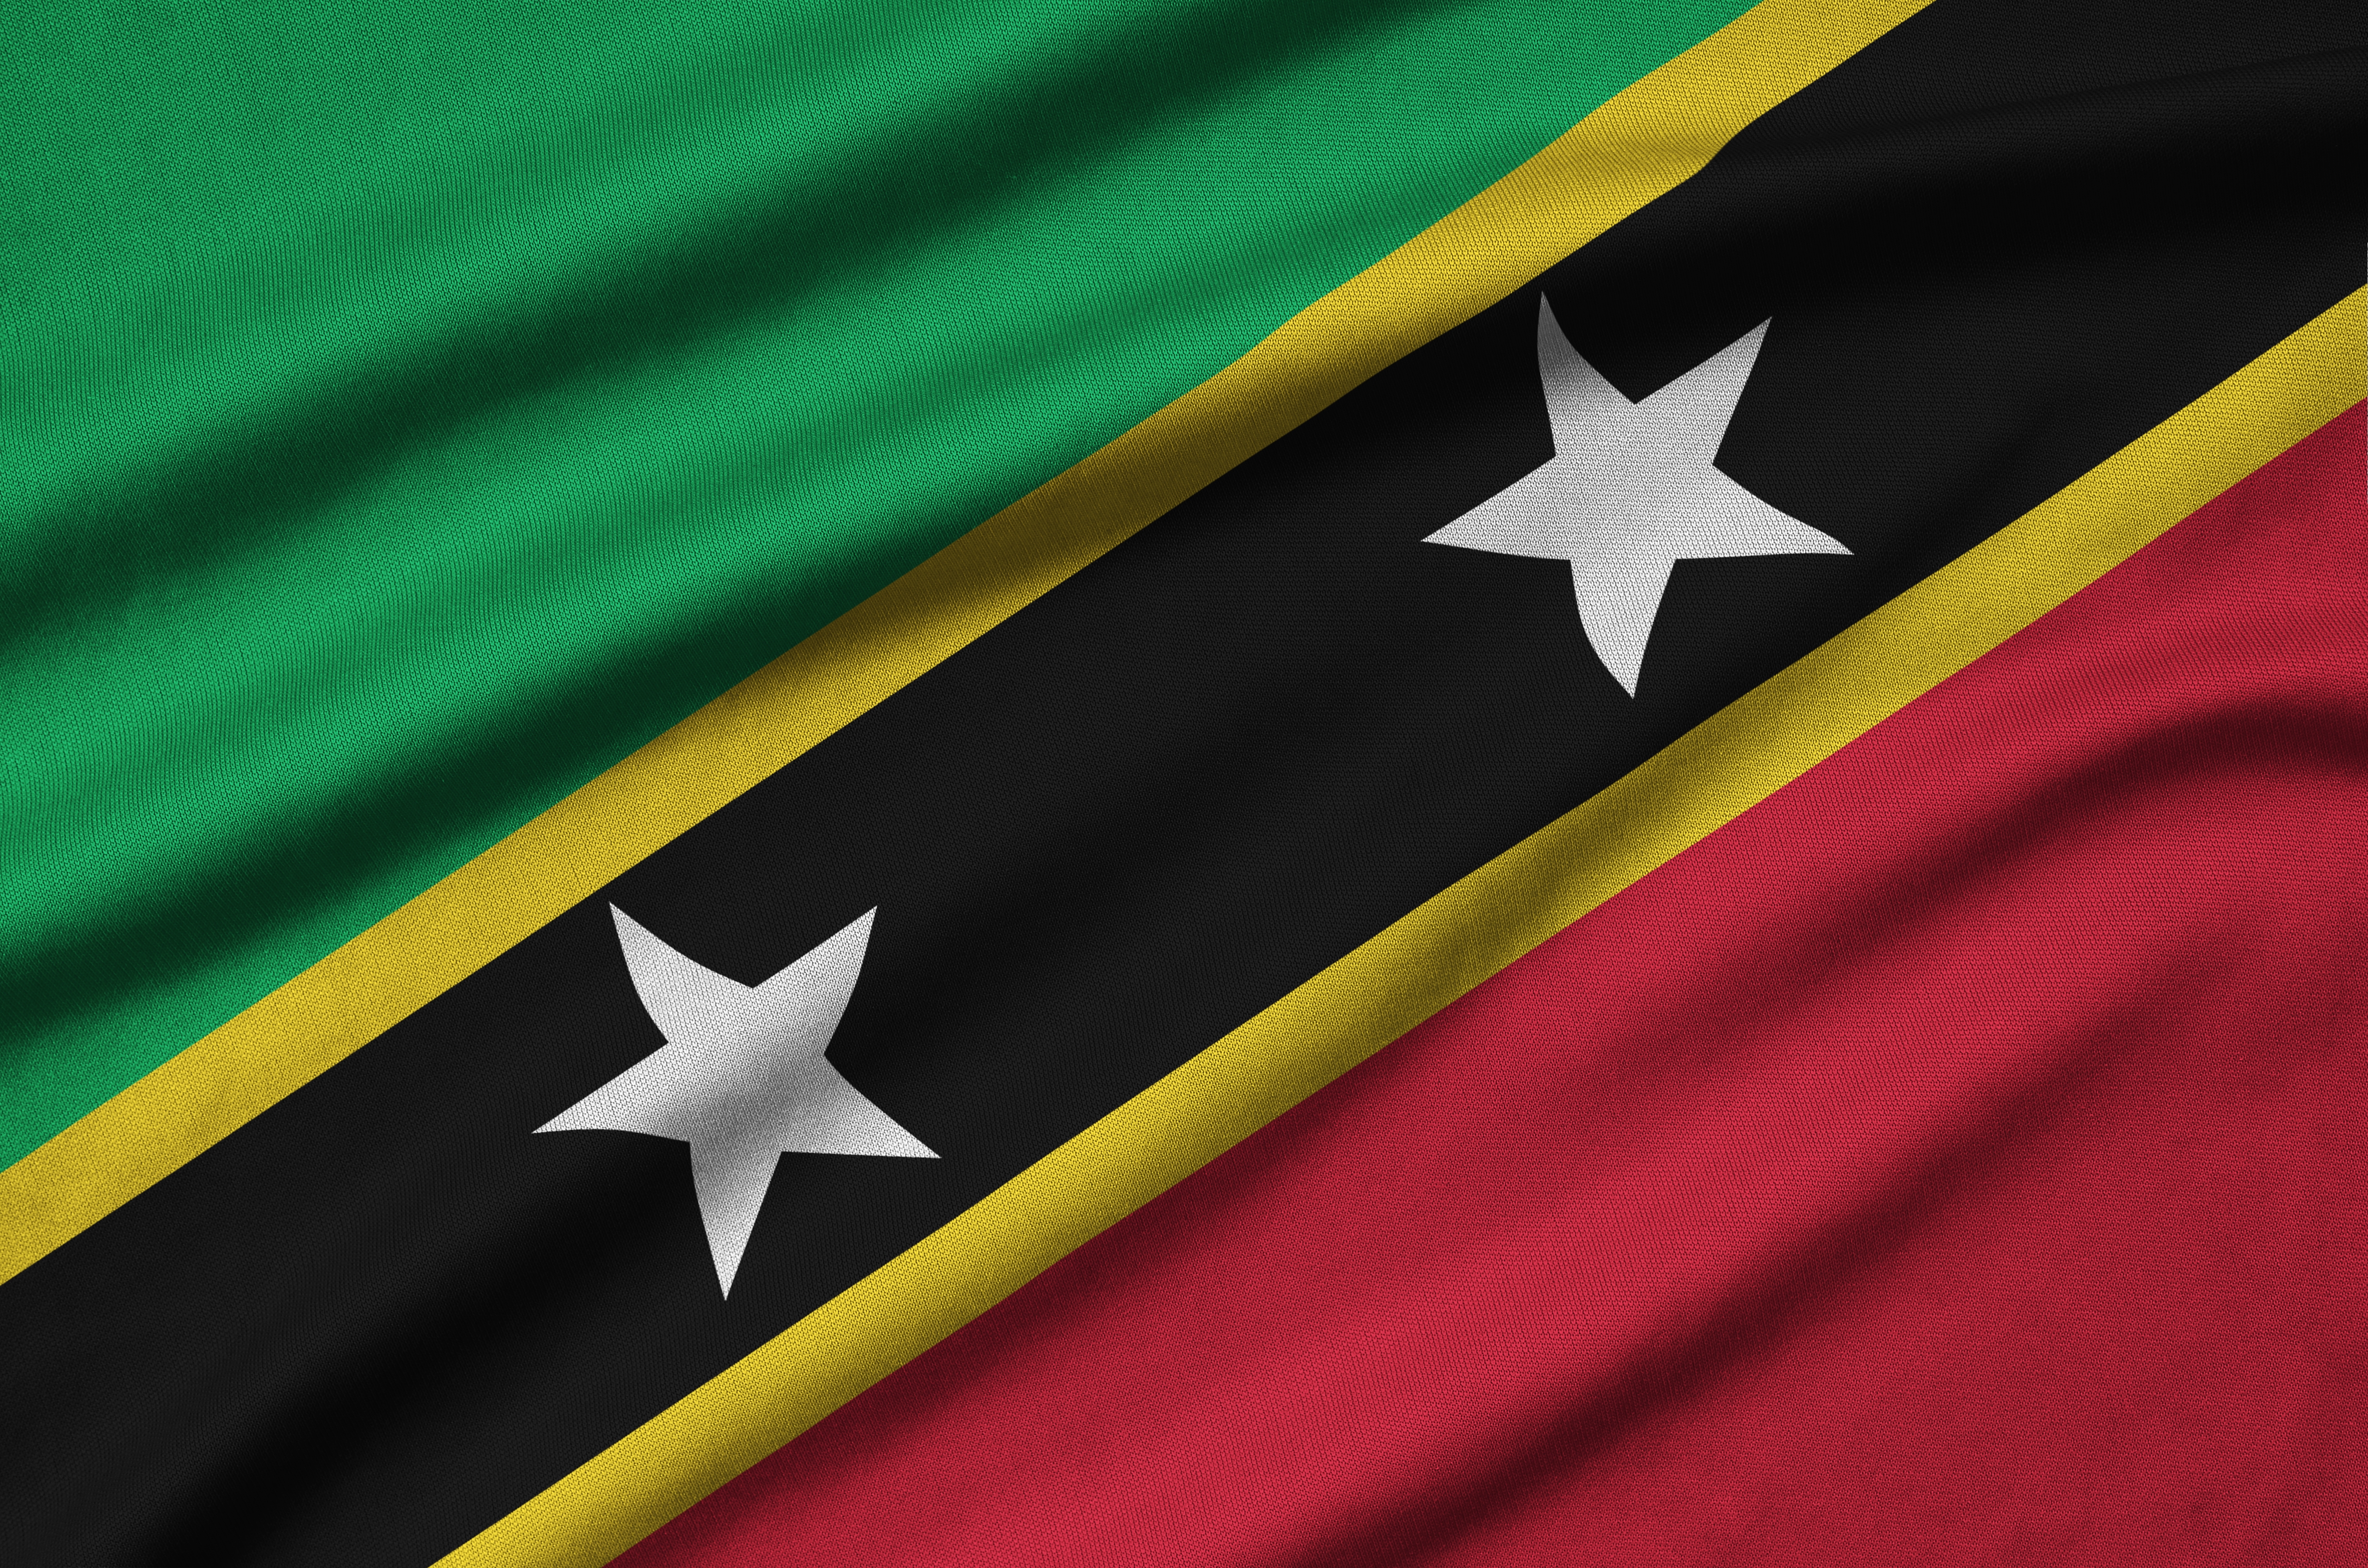 saint-kitts-and-nevis-flag-is-depicted-on-a-sports-WKQPV3D.jpg (12.74 MB)